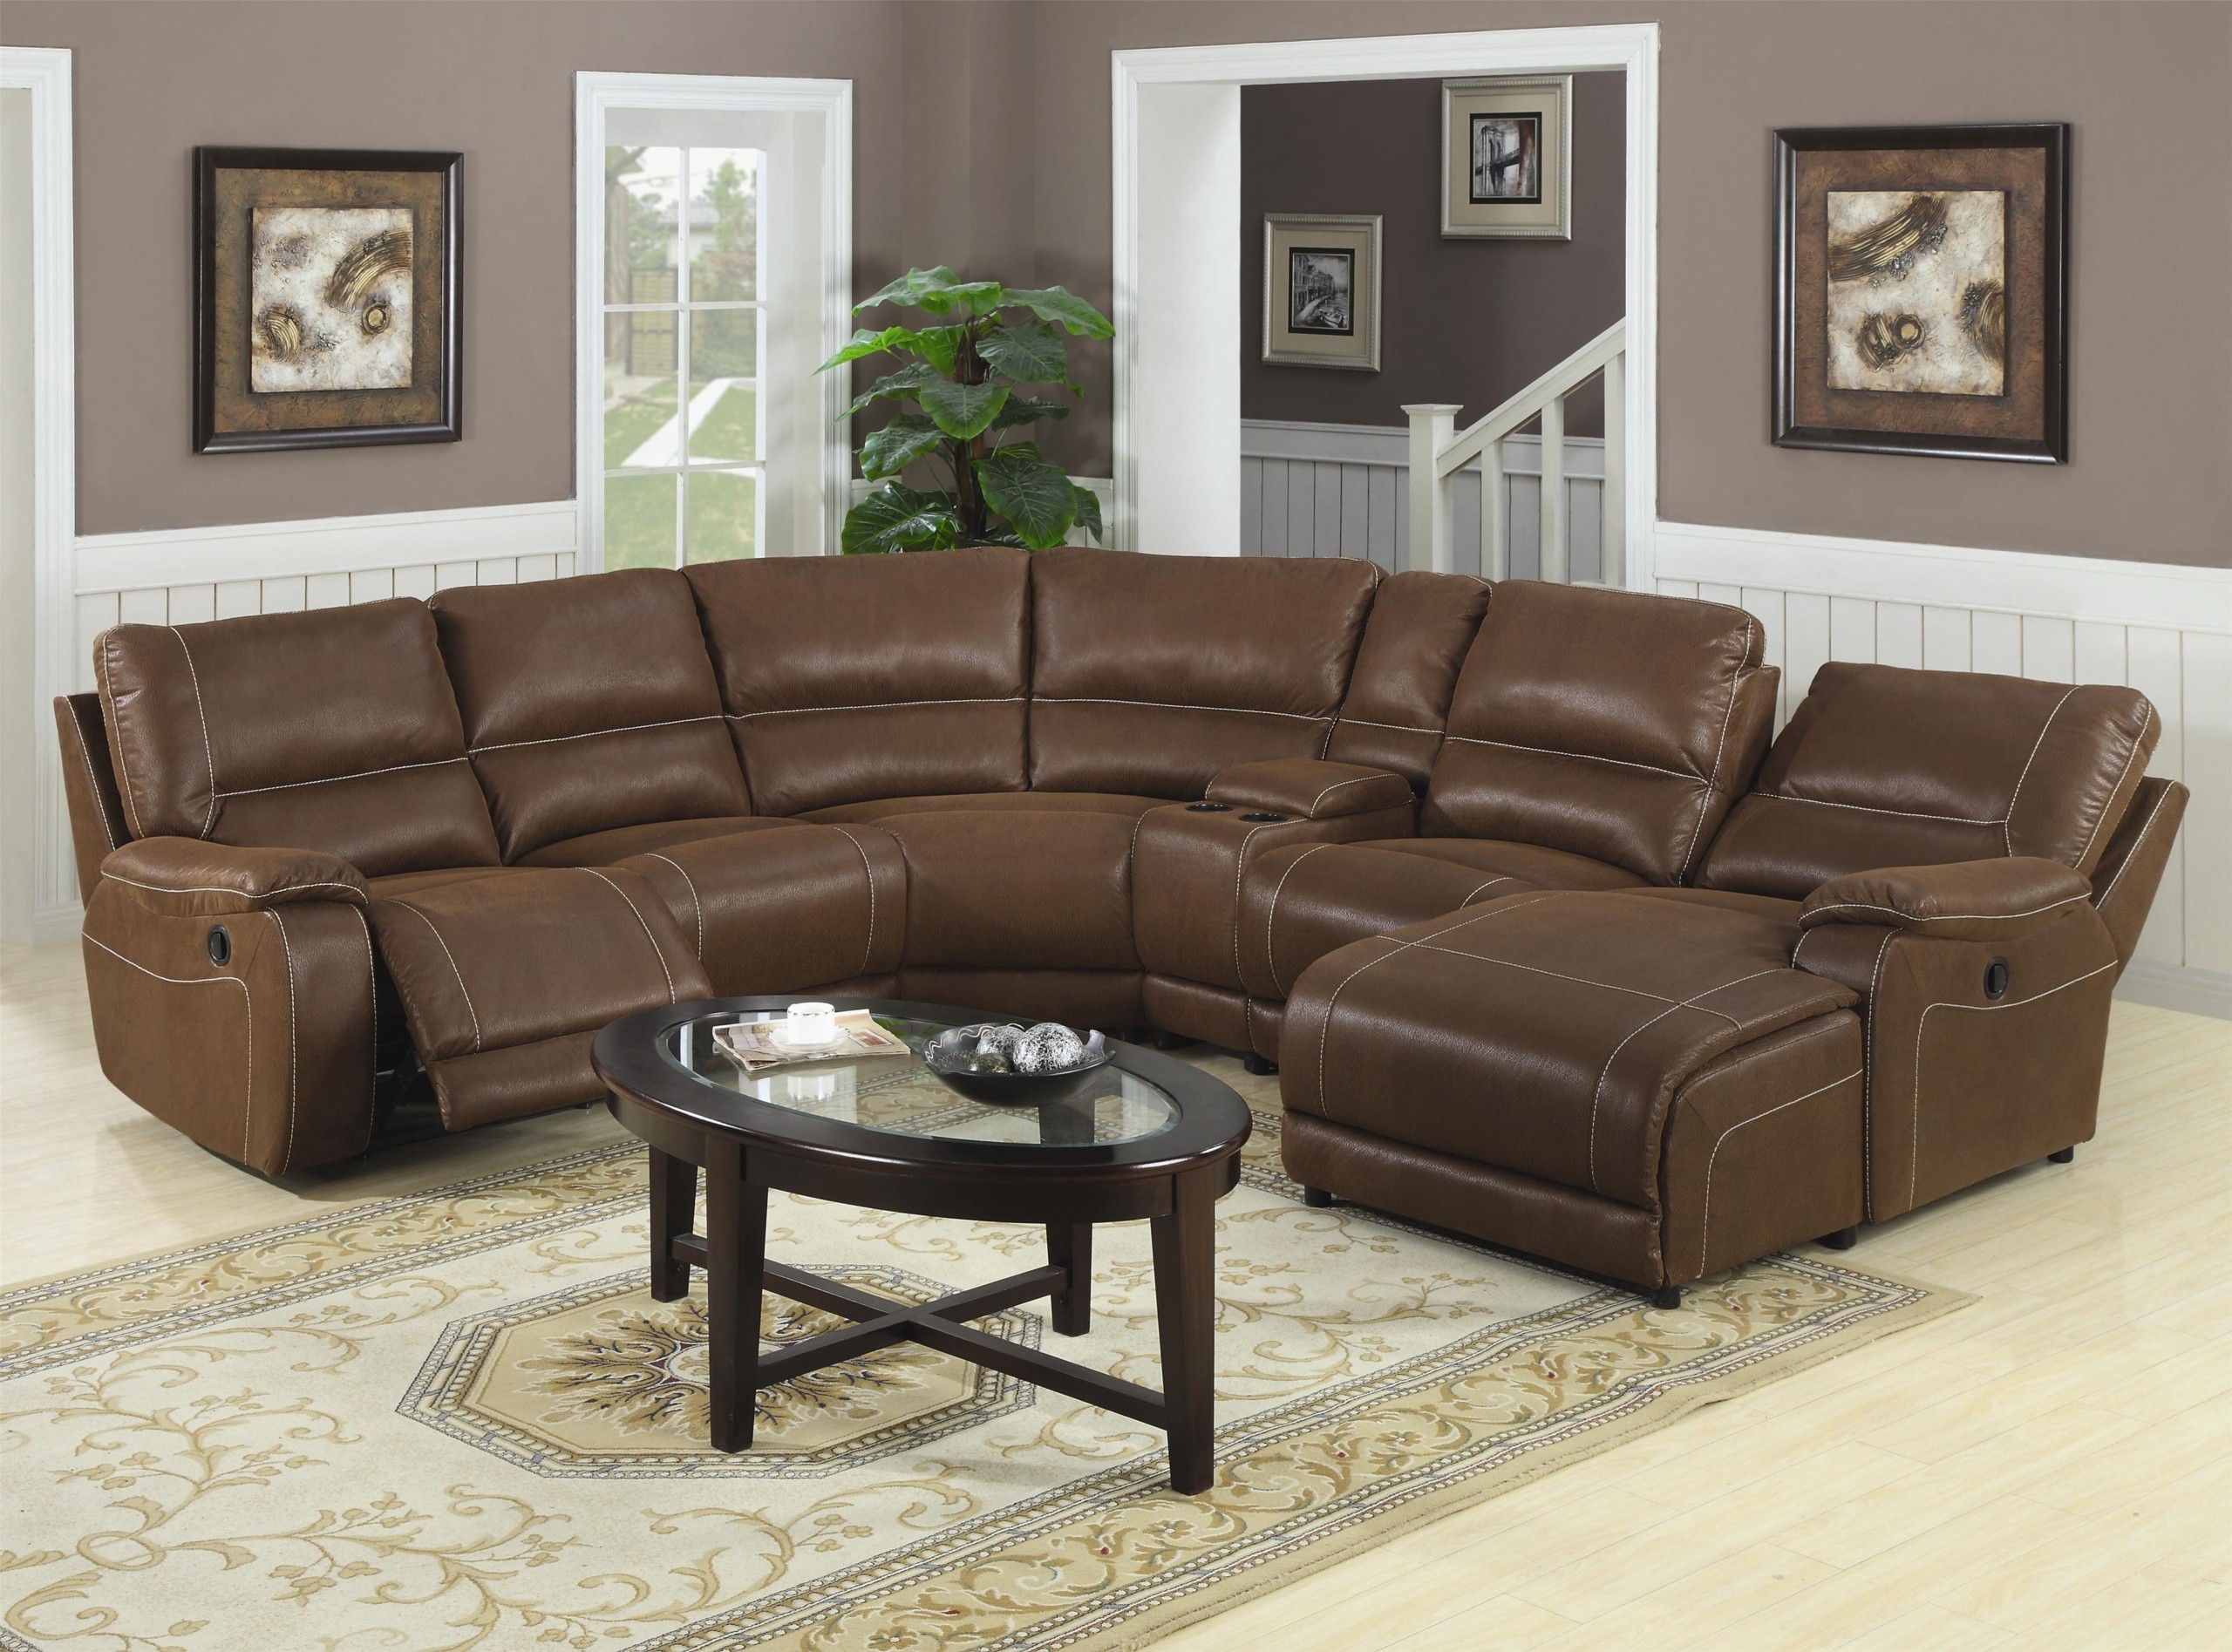 Recliner with chaise